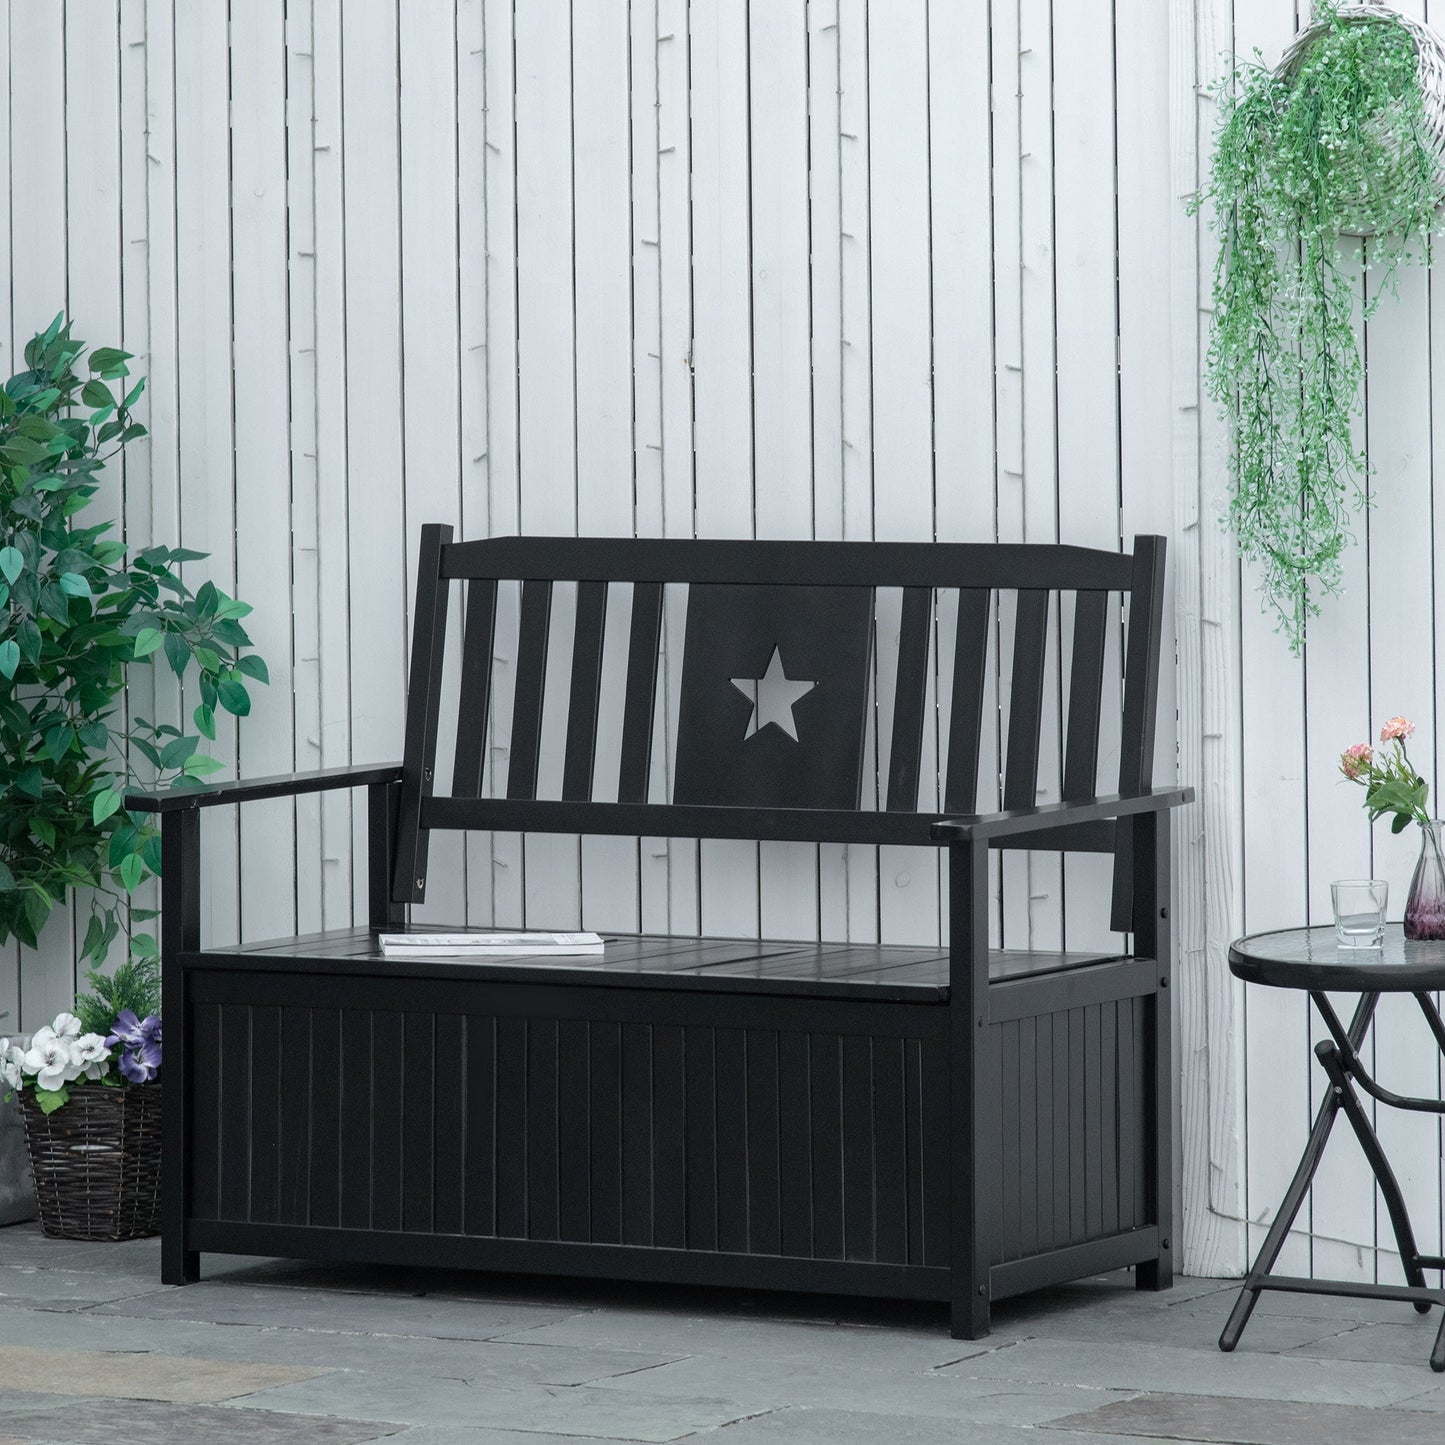 Outdoor and Garden-43 Gallon Outdoor Storage Bench, Wooden Loveseat Deck Box, 2-Seat Container for Store Garden Tools Toys, Black - Outdoor Style Company